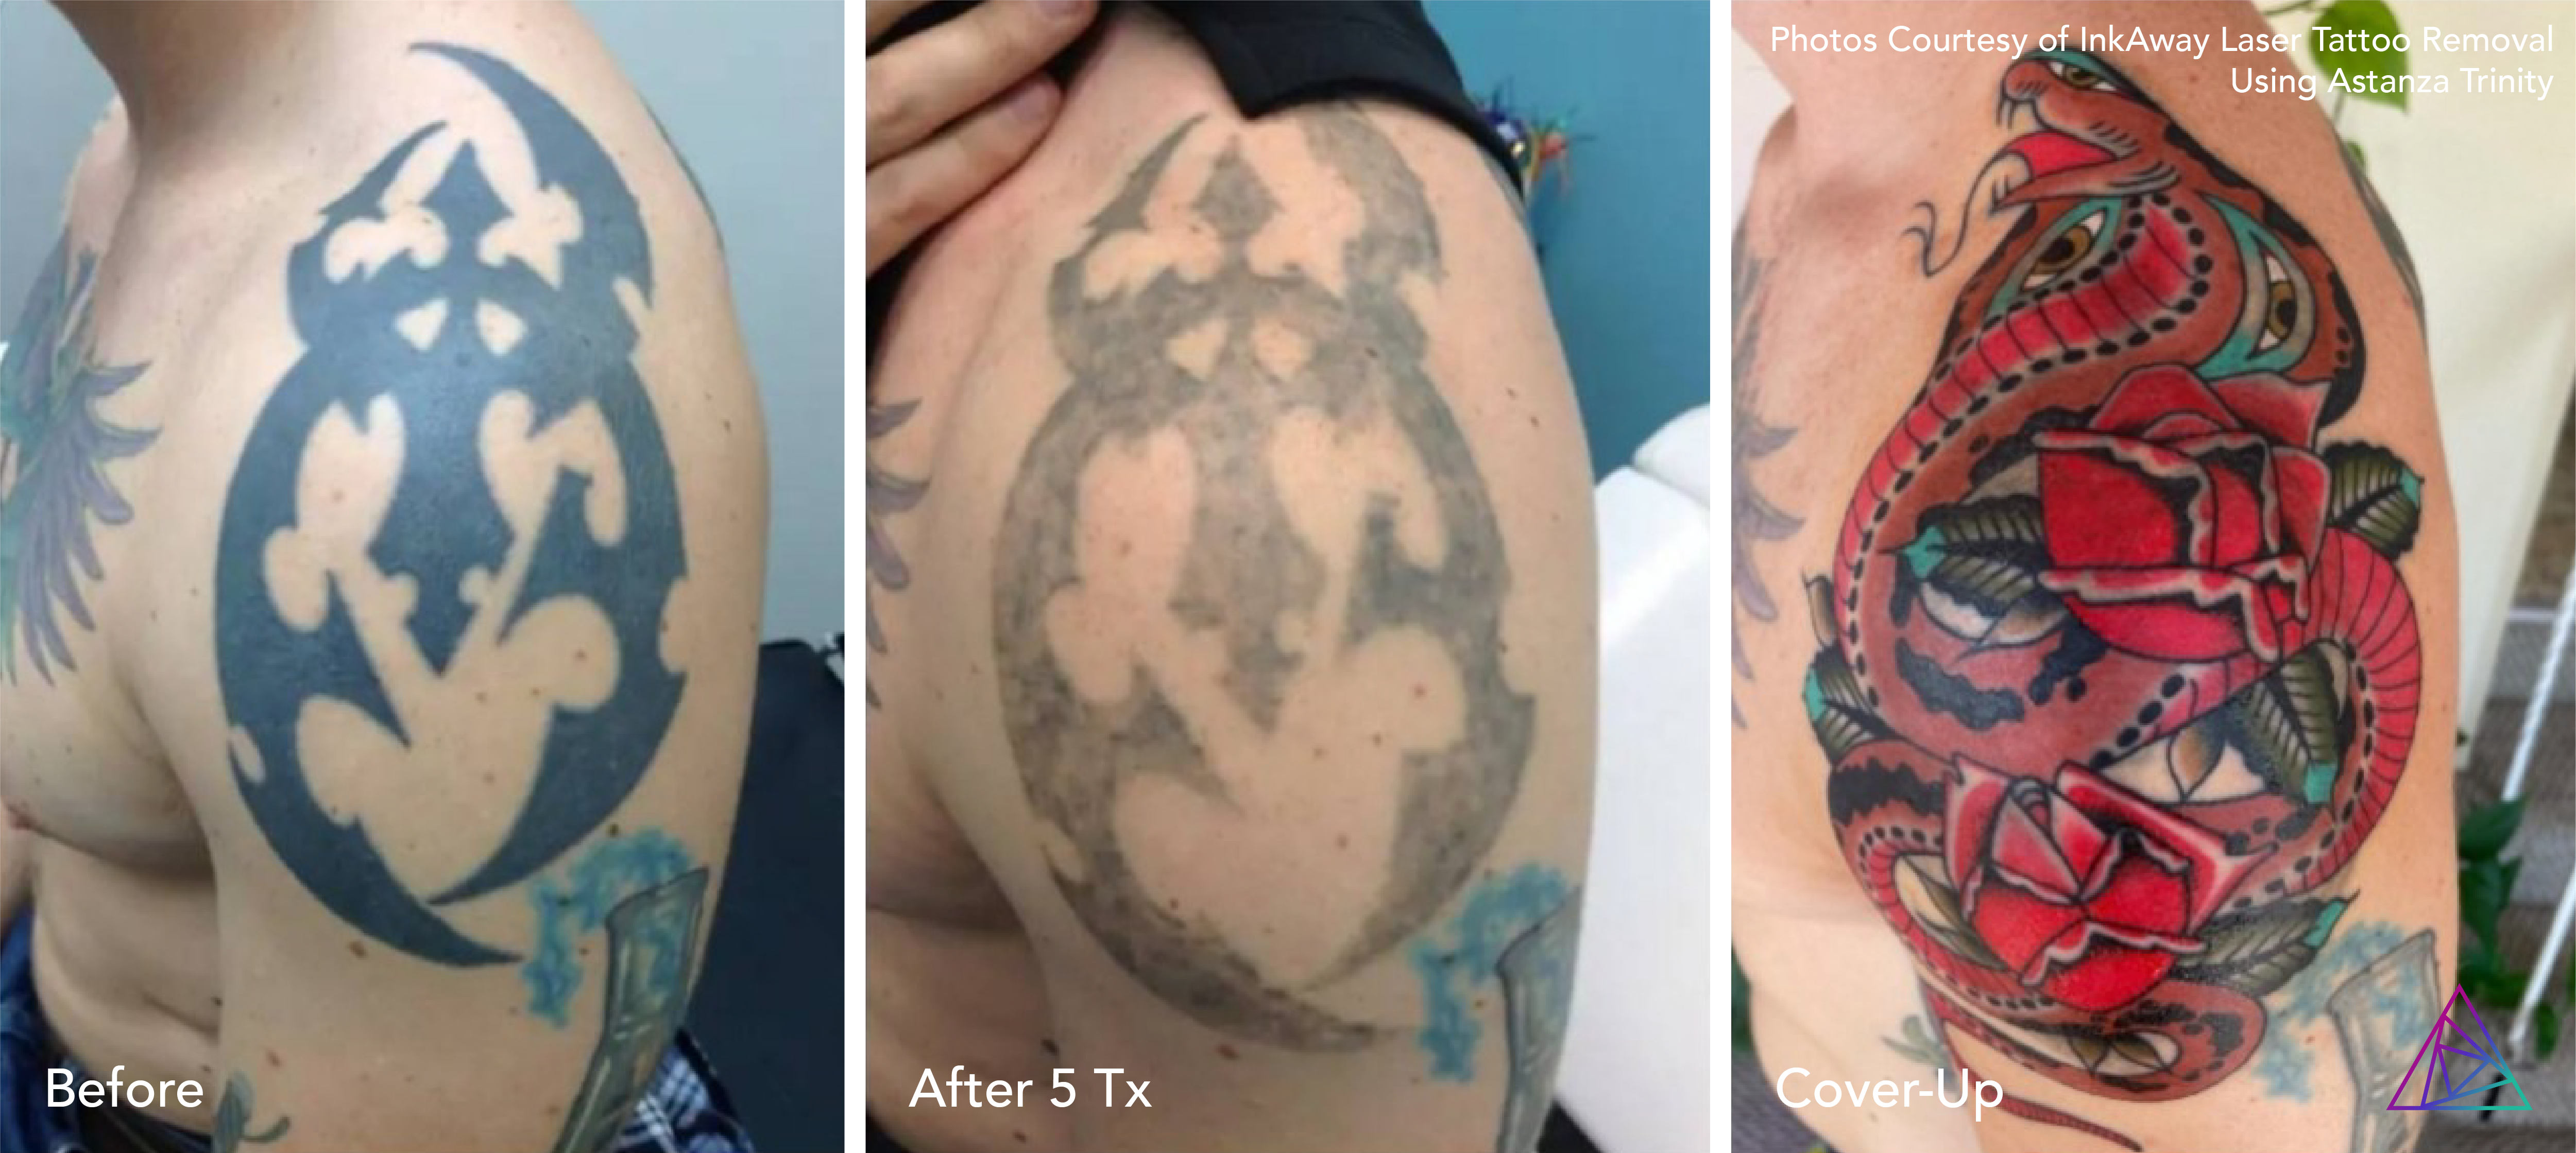 Vol 1 Top 10 Before  After Tattoo Removal Results  Removery